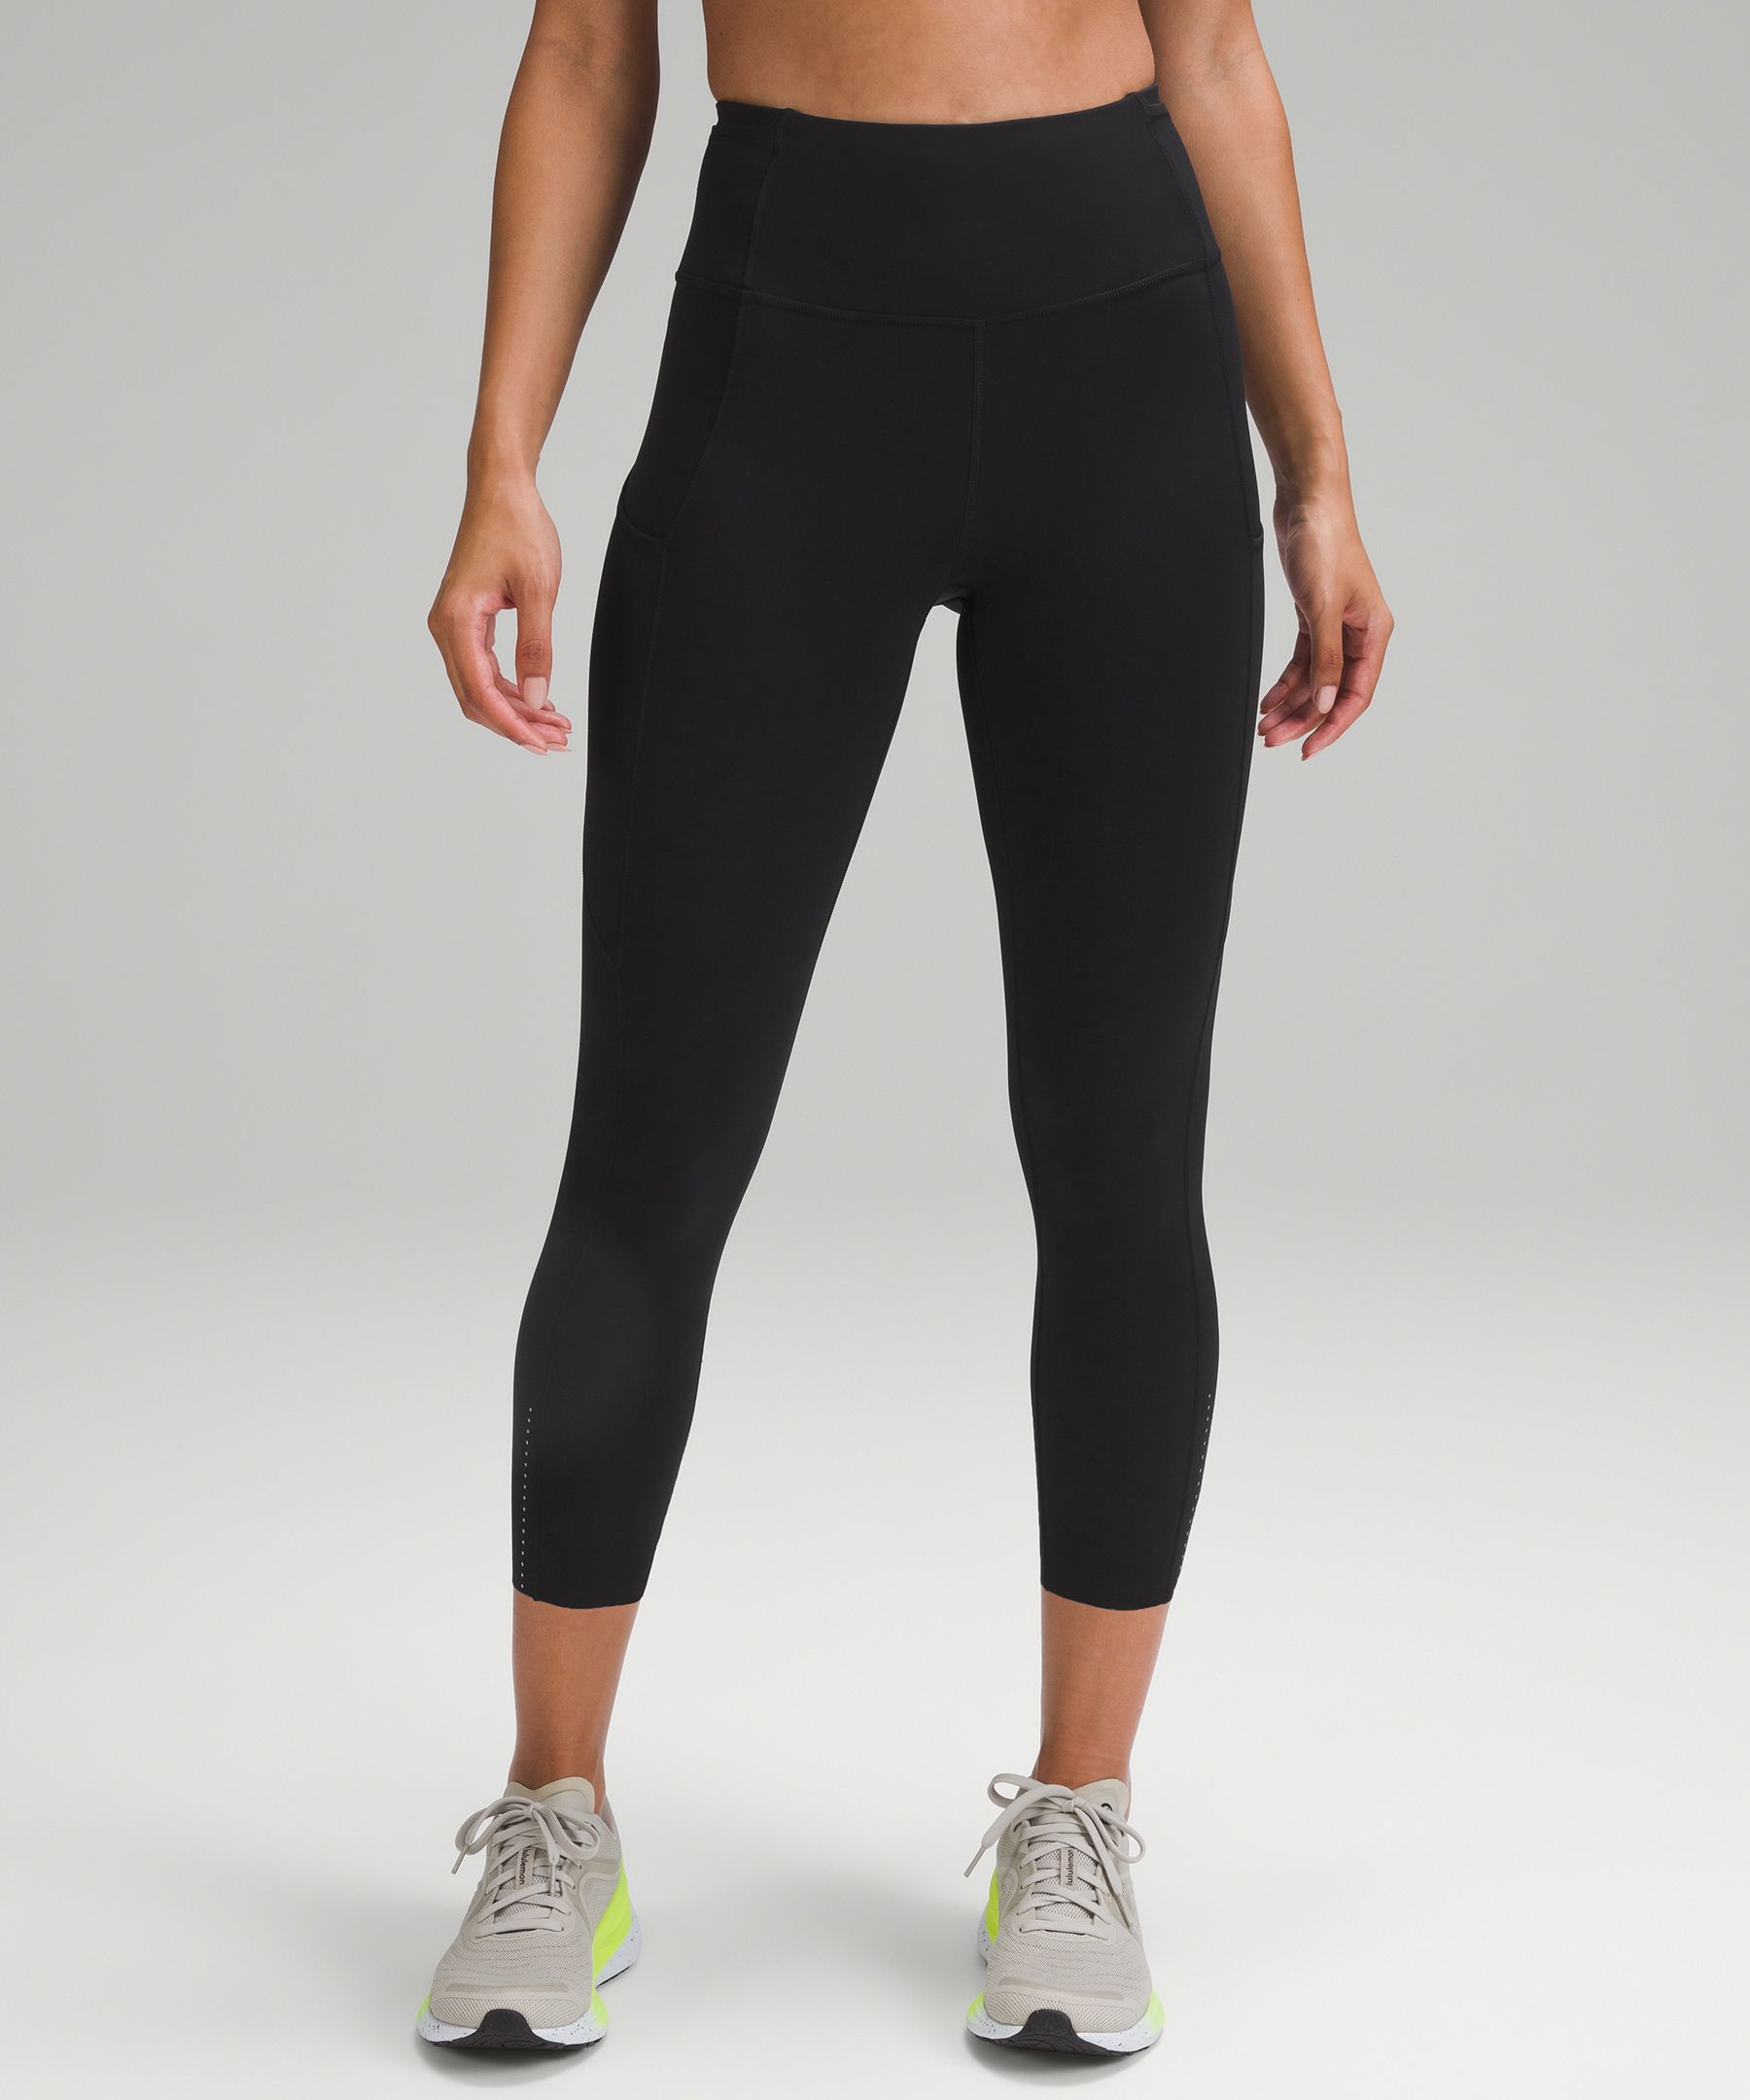 LULULEMON FAST AND FREE REFLECTIVE HIGH-RISE CROP 23"